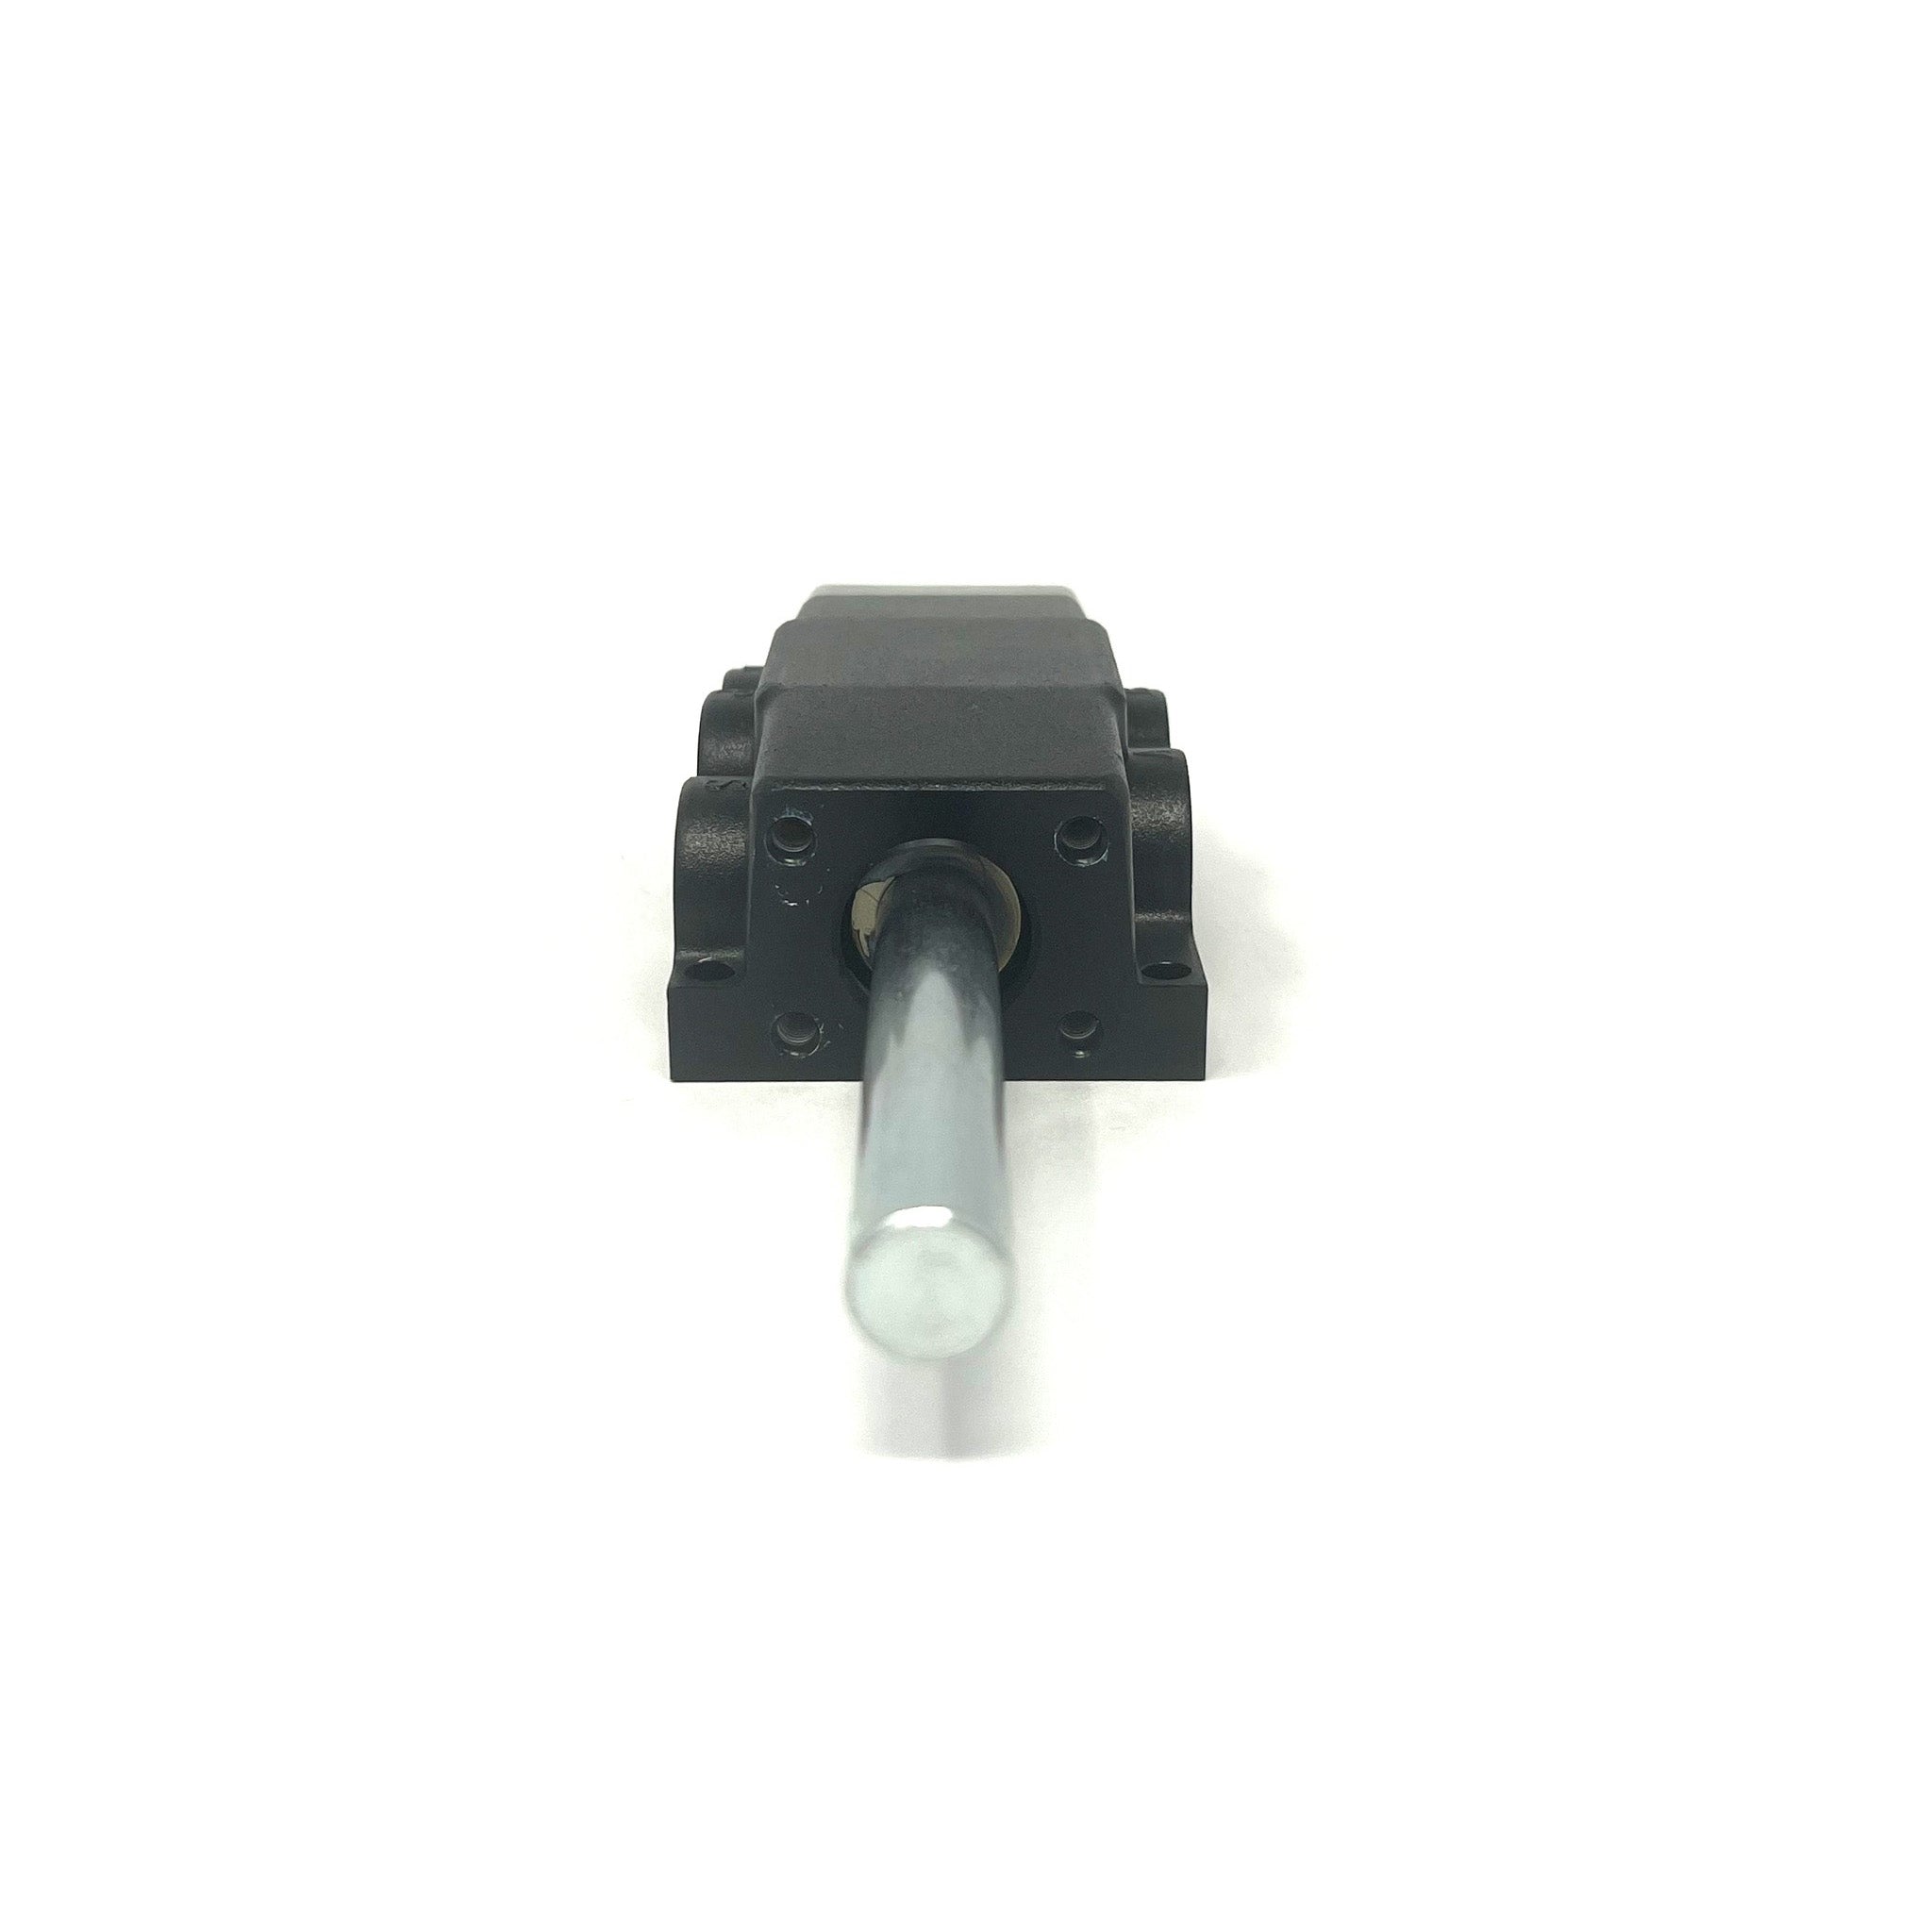 4 Way Air Valve With Internal Centering Spring- OEM Body Style